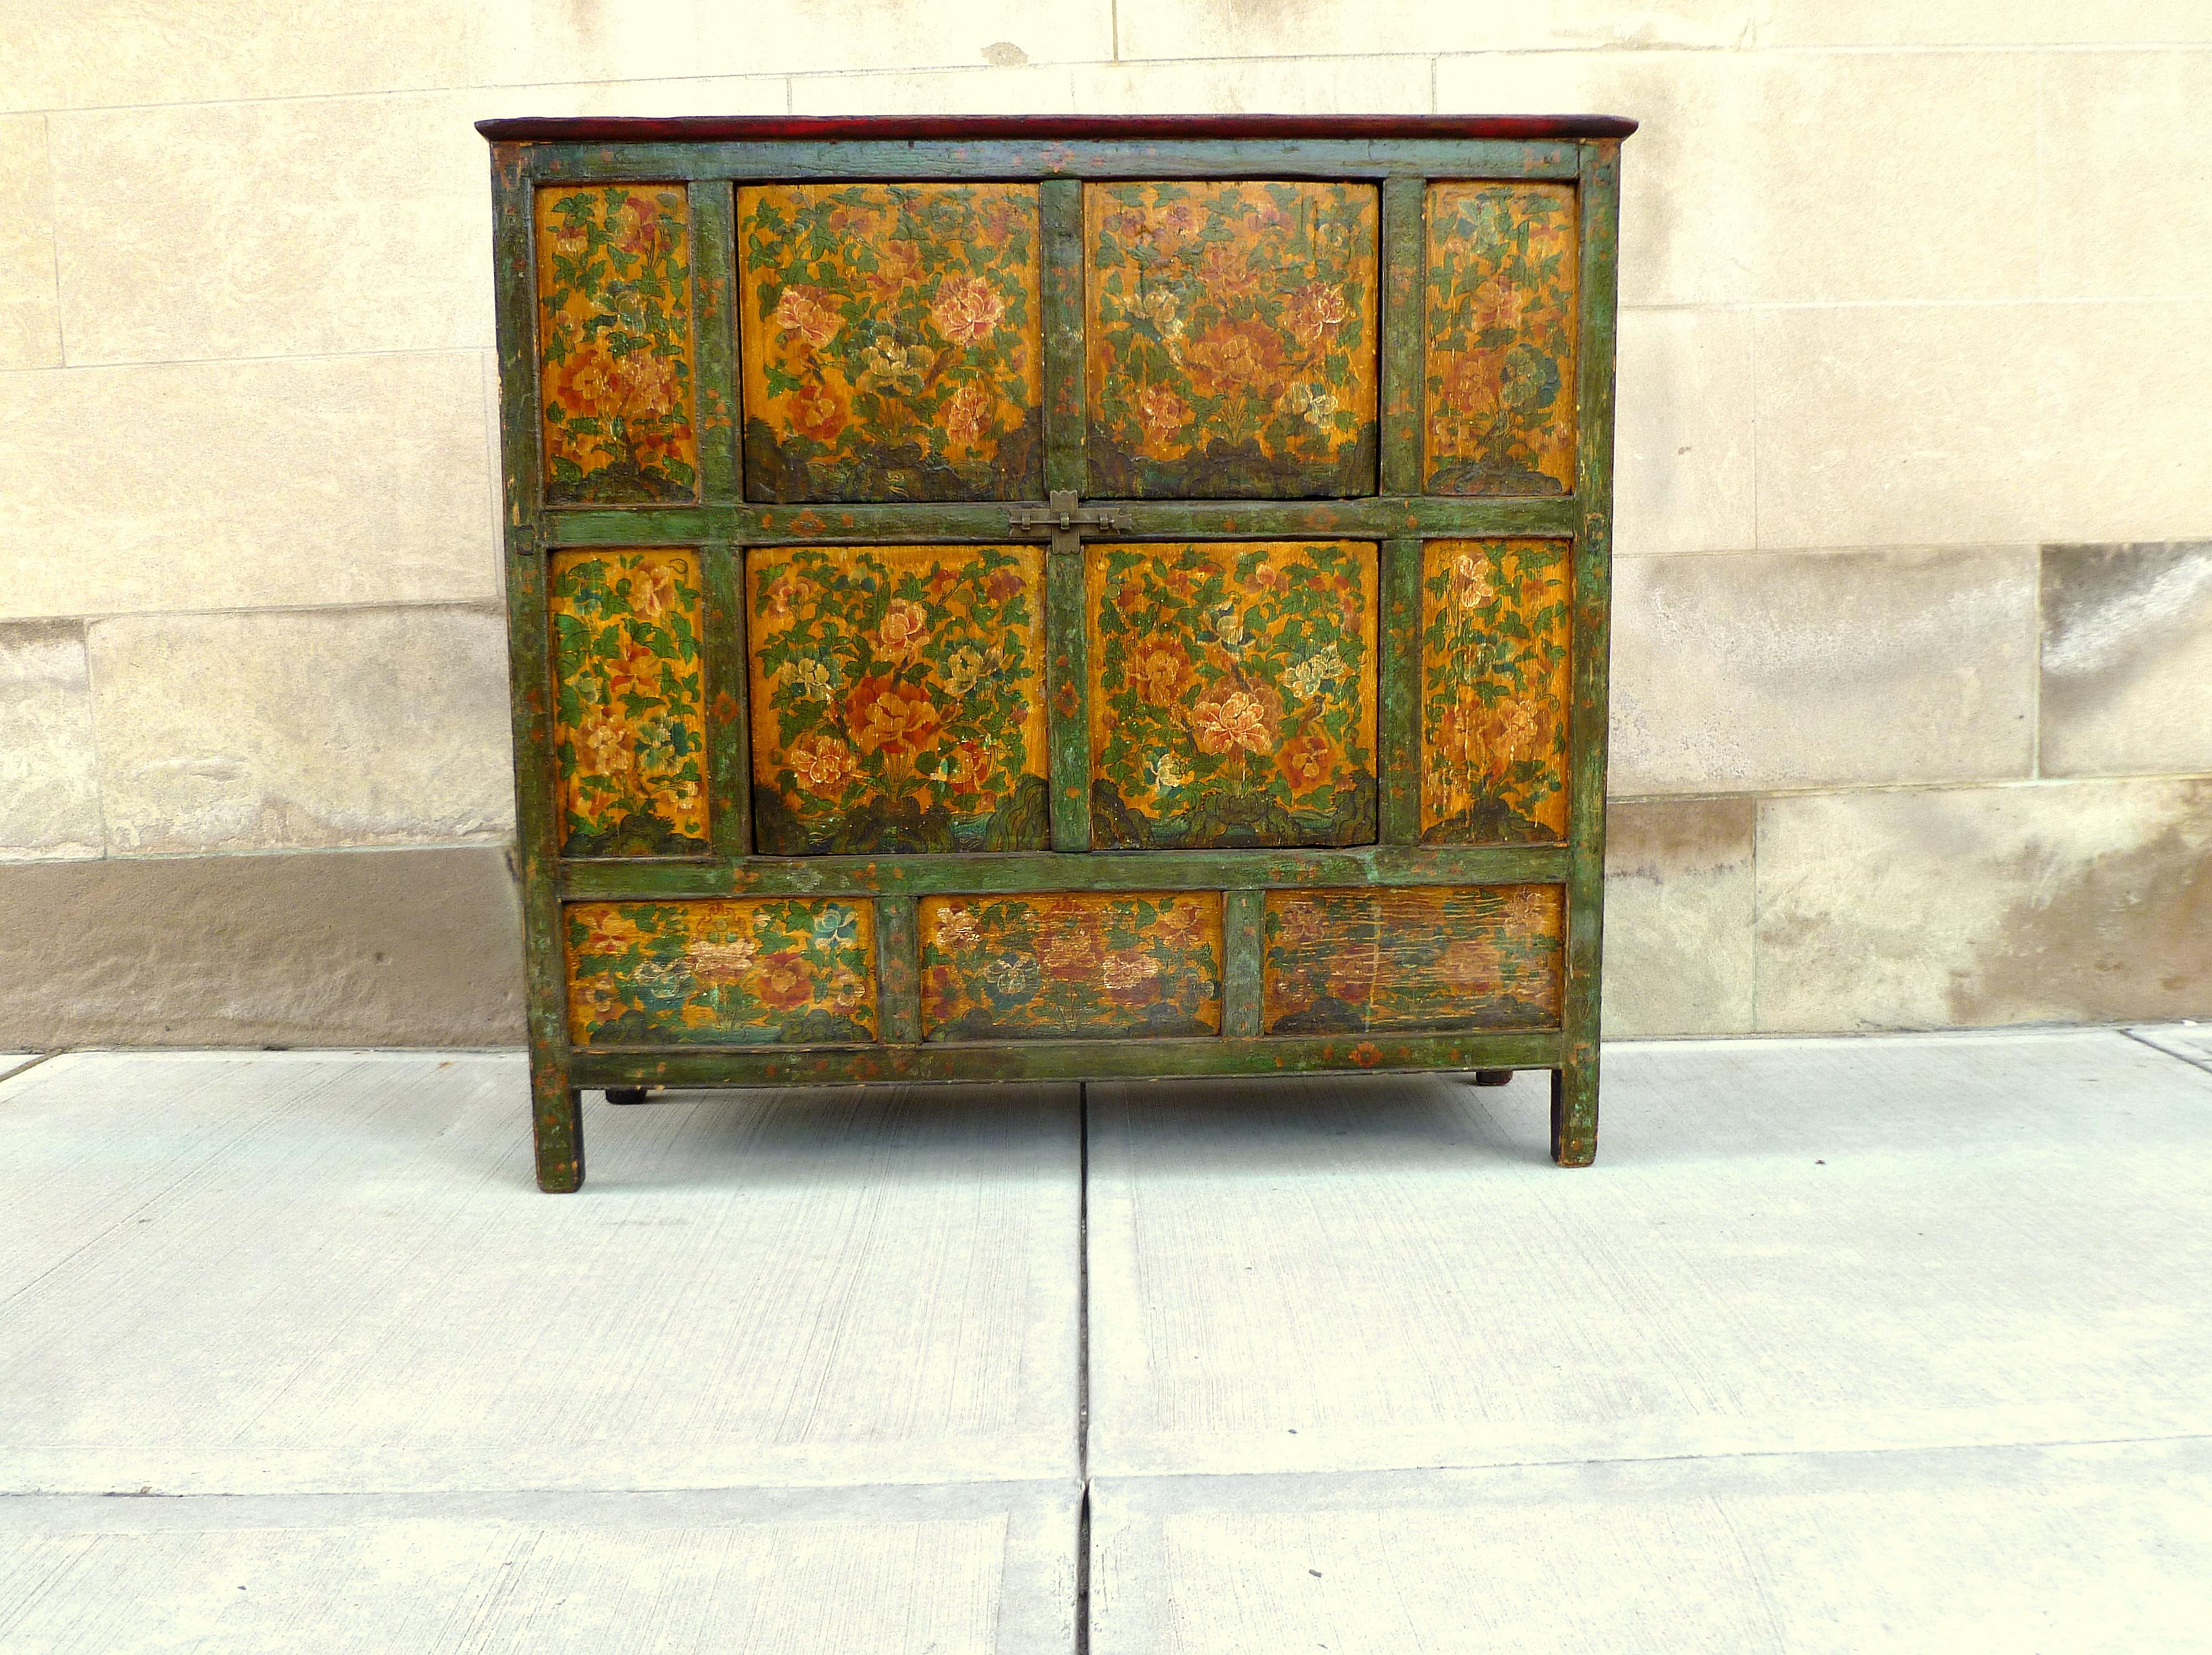 Tibetan chest with beautiful hand painted floral motif, two pairs of doors.